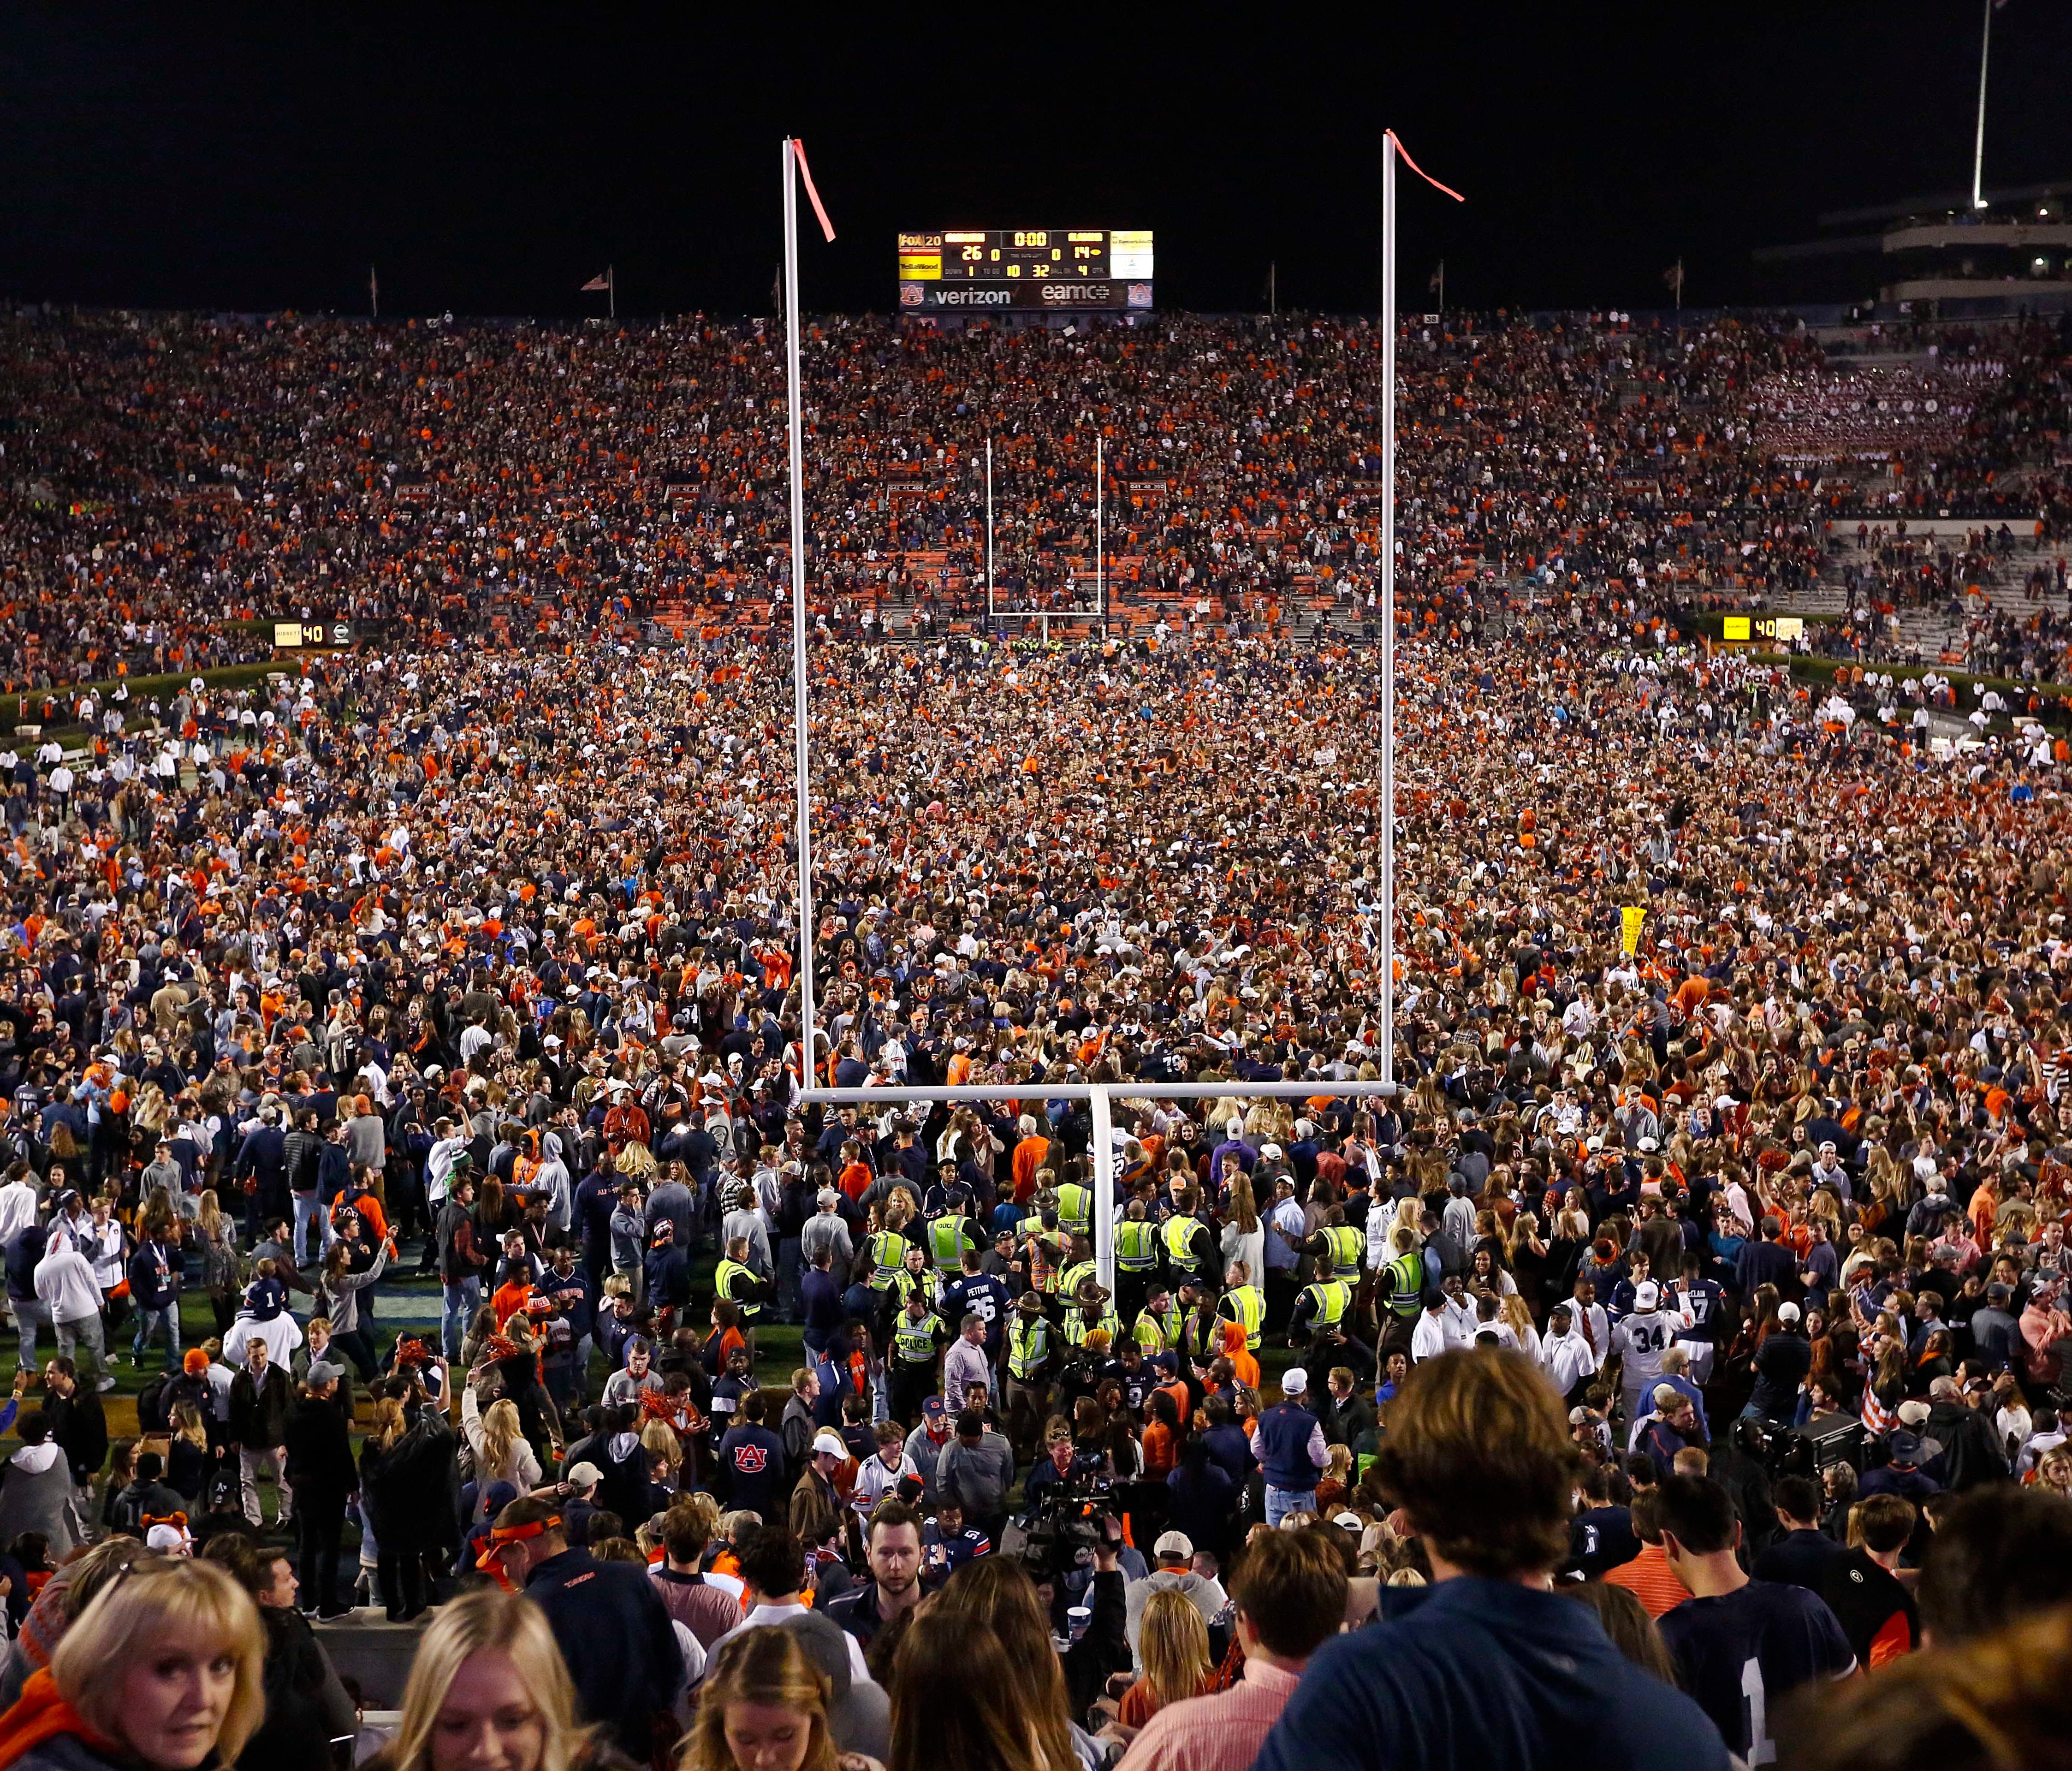 Fans rush the field after Auburn defeated Alabama in the Iron Bowl.